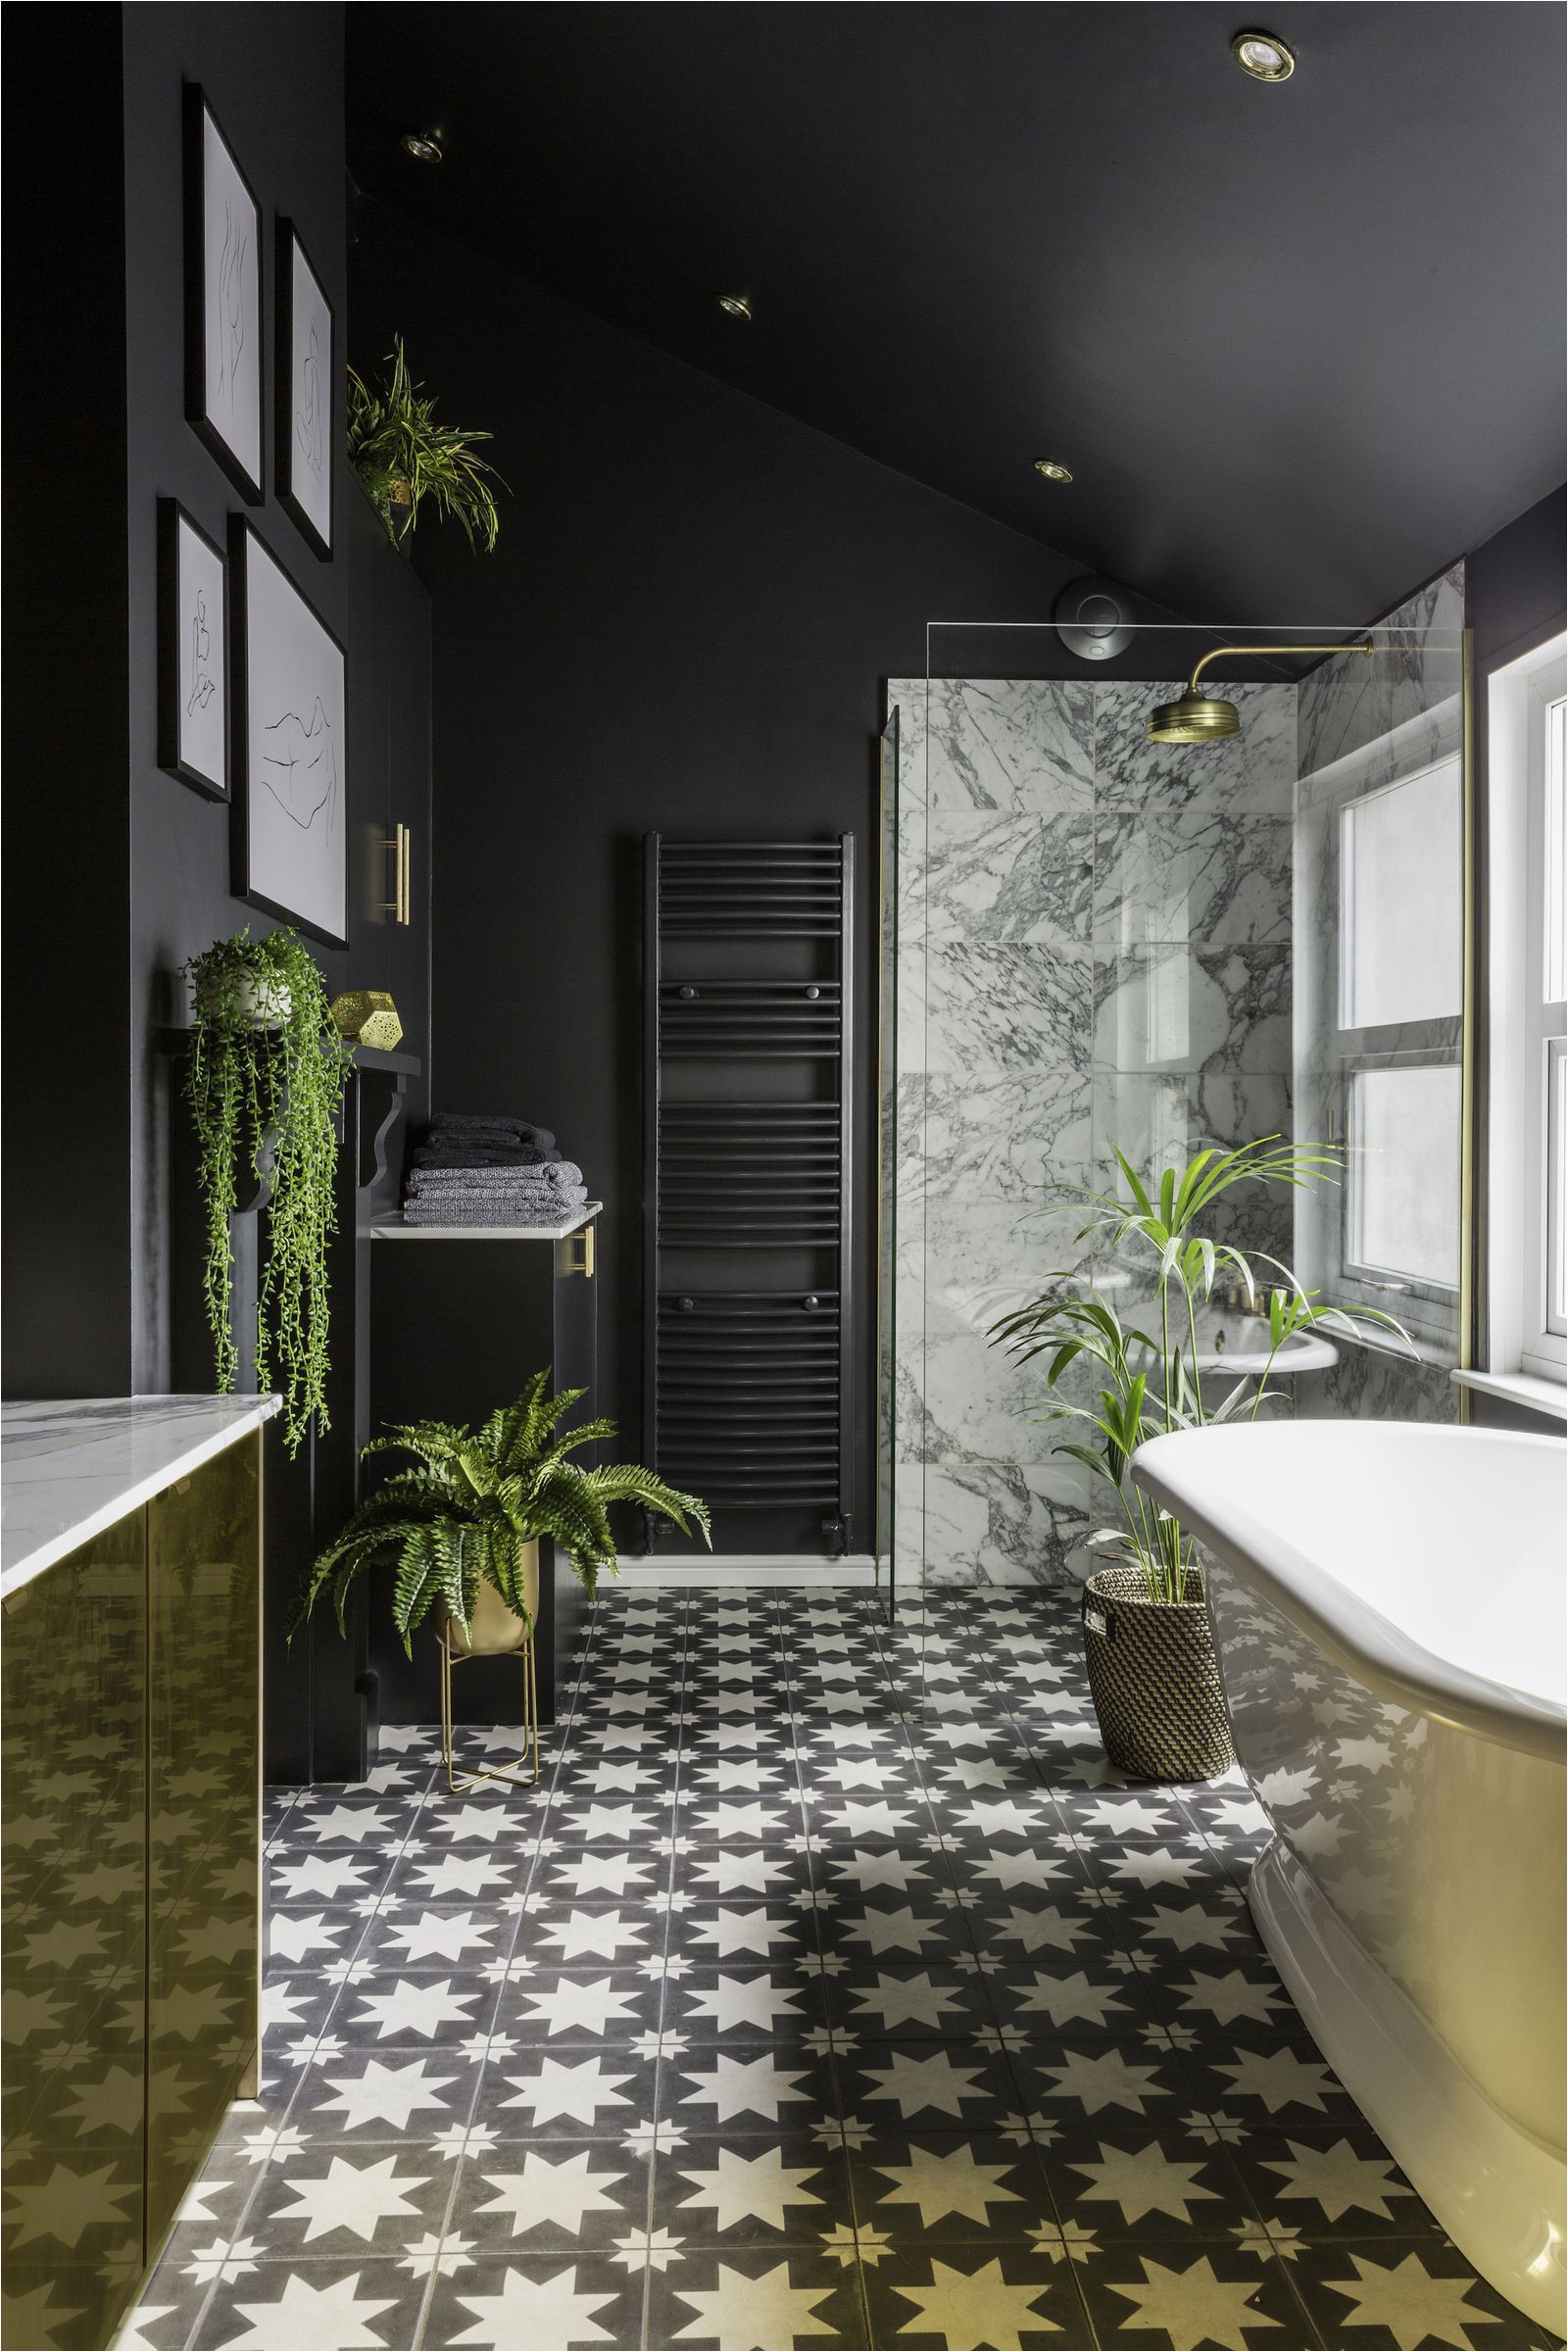 Small Black Bathroom Rug This Black and Gold Bathroom Will Make You Want to